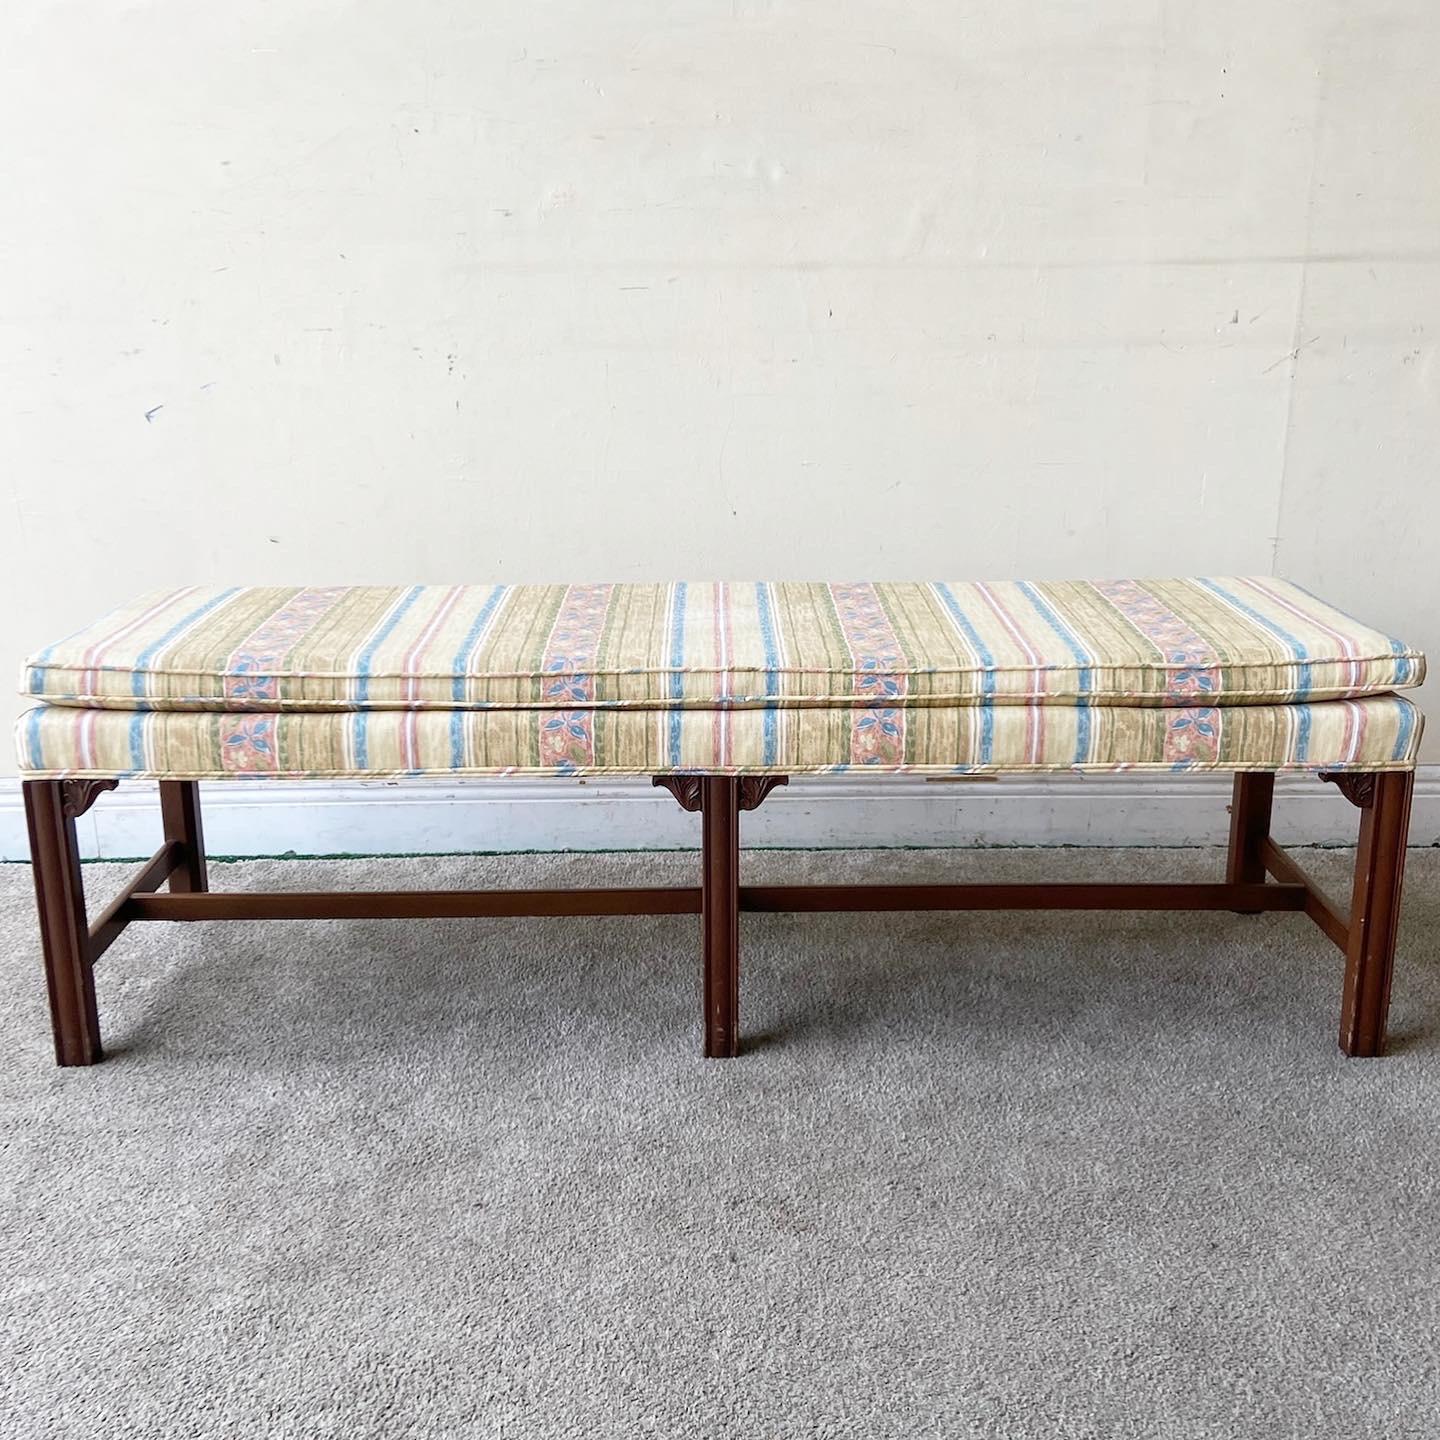 American Mid Century Wooden Bench with Floral Fabric